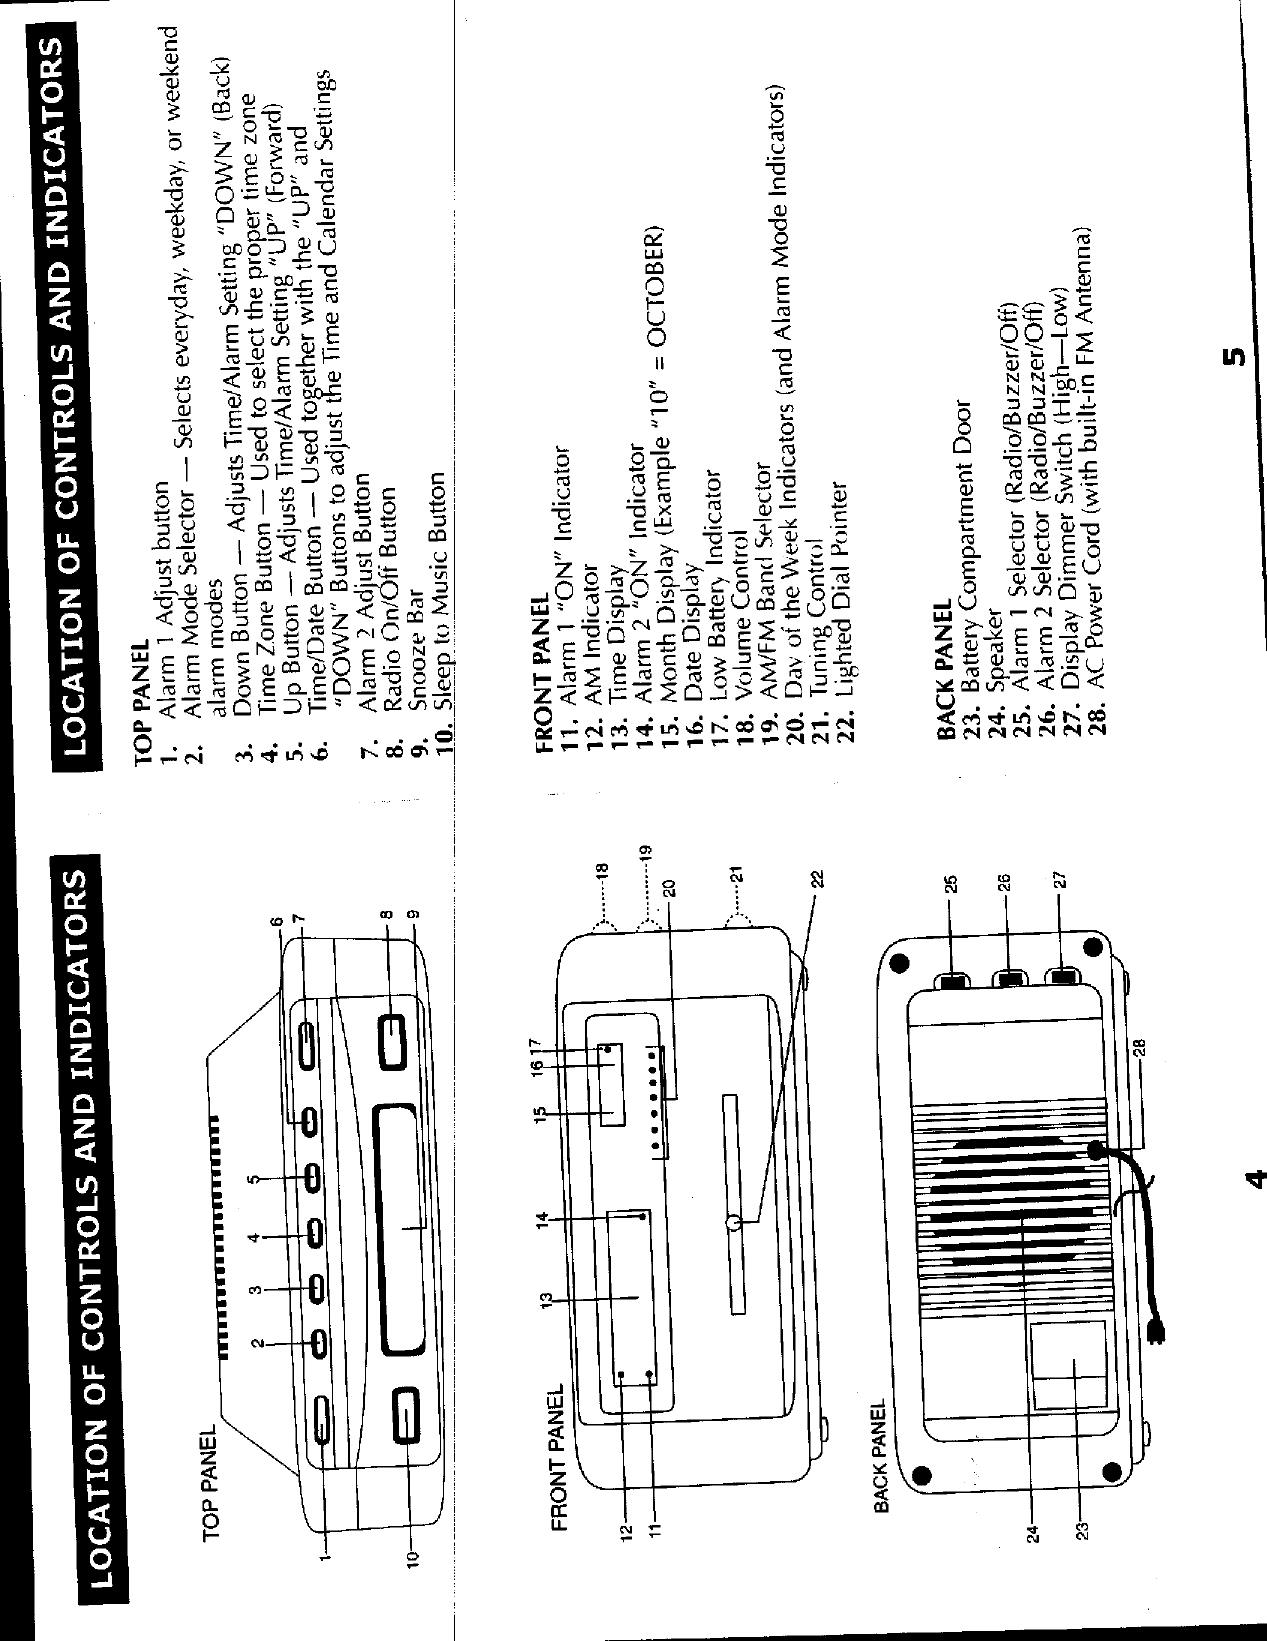 Page 3 of 8 - Emerson  File